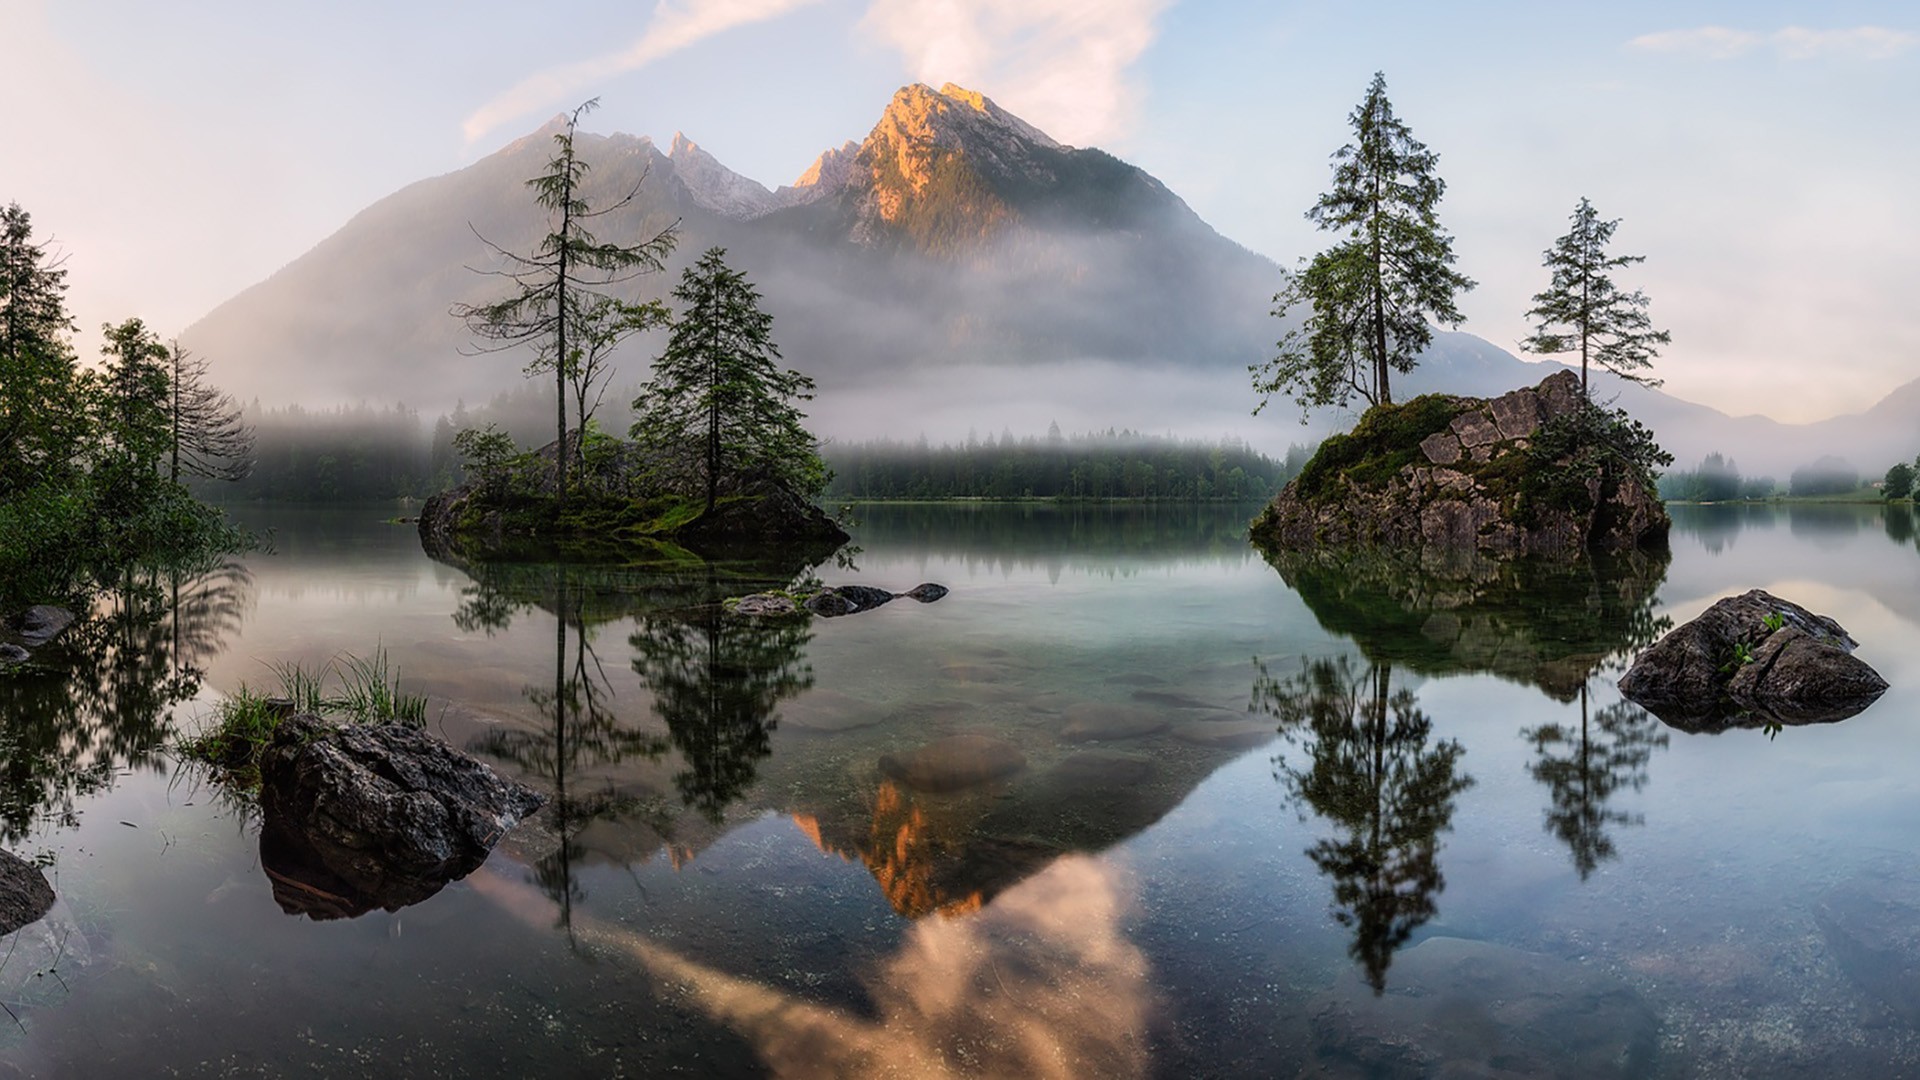 General 1920x1080 mountains lake landscape morning mist calm nature reflection calm waters